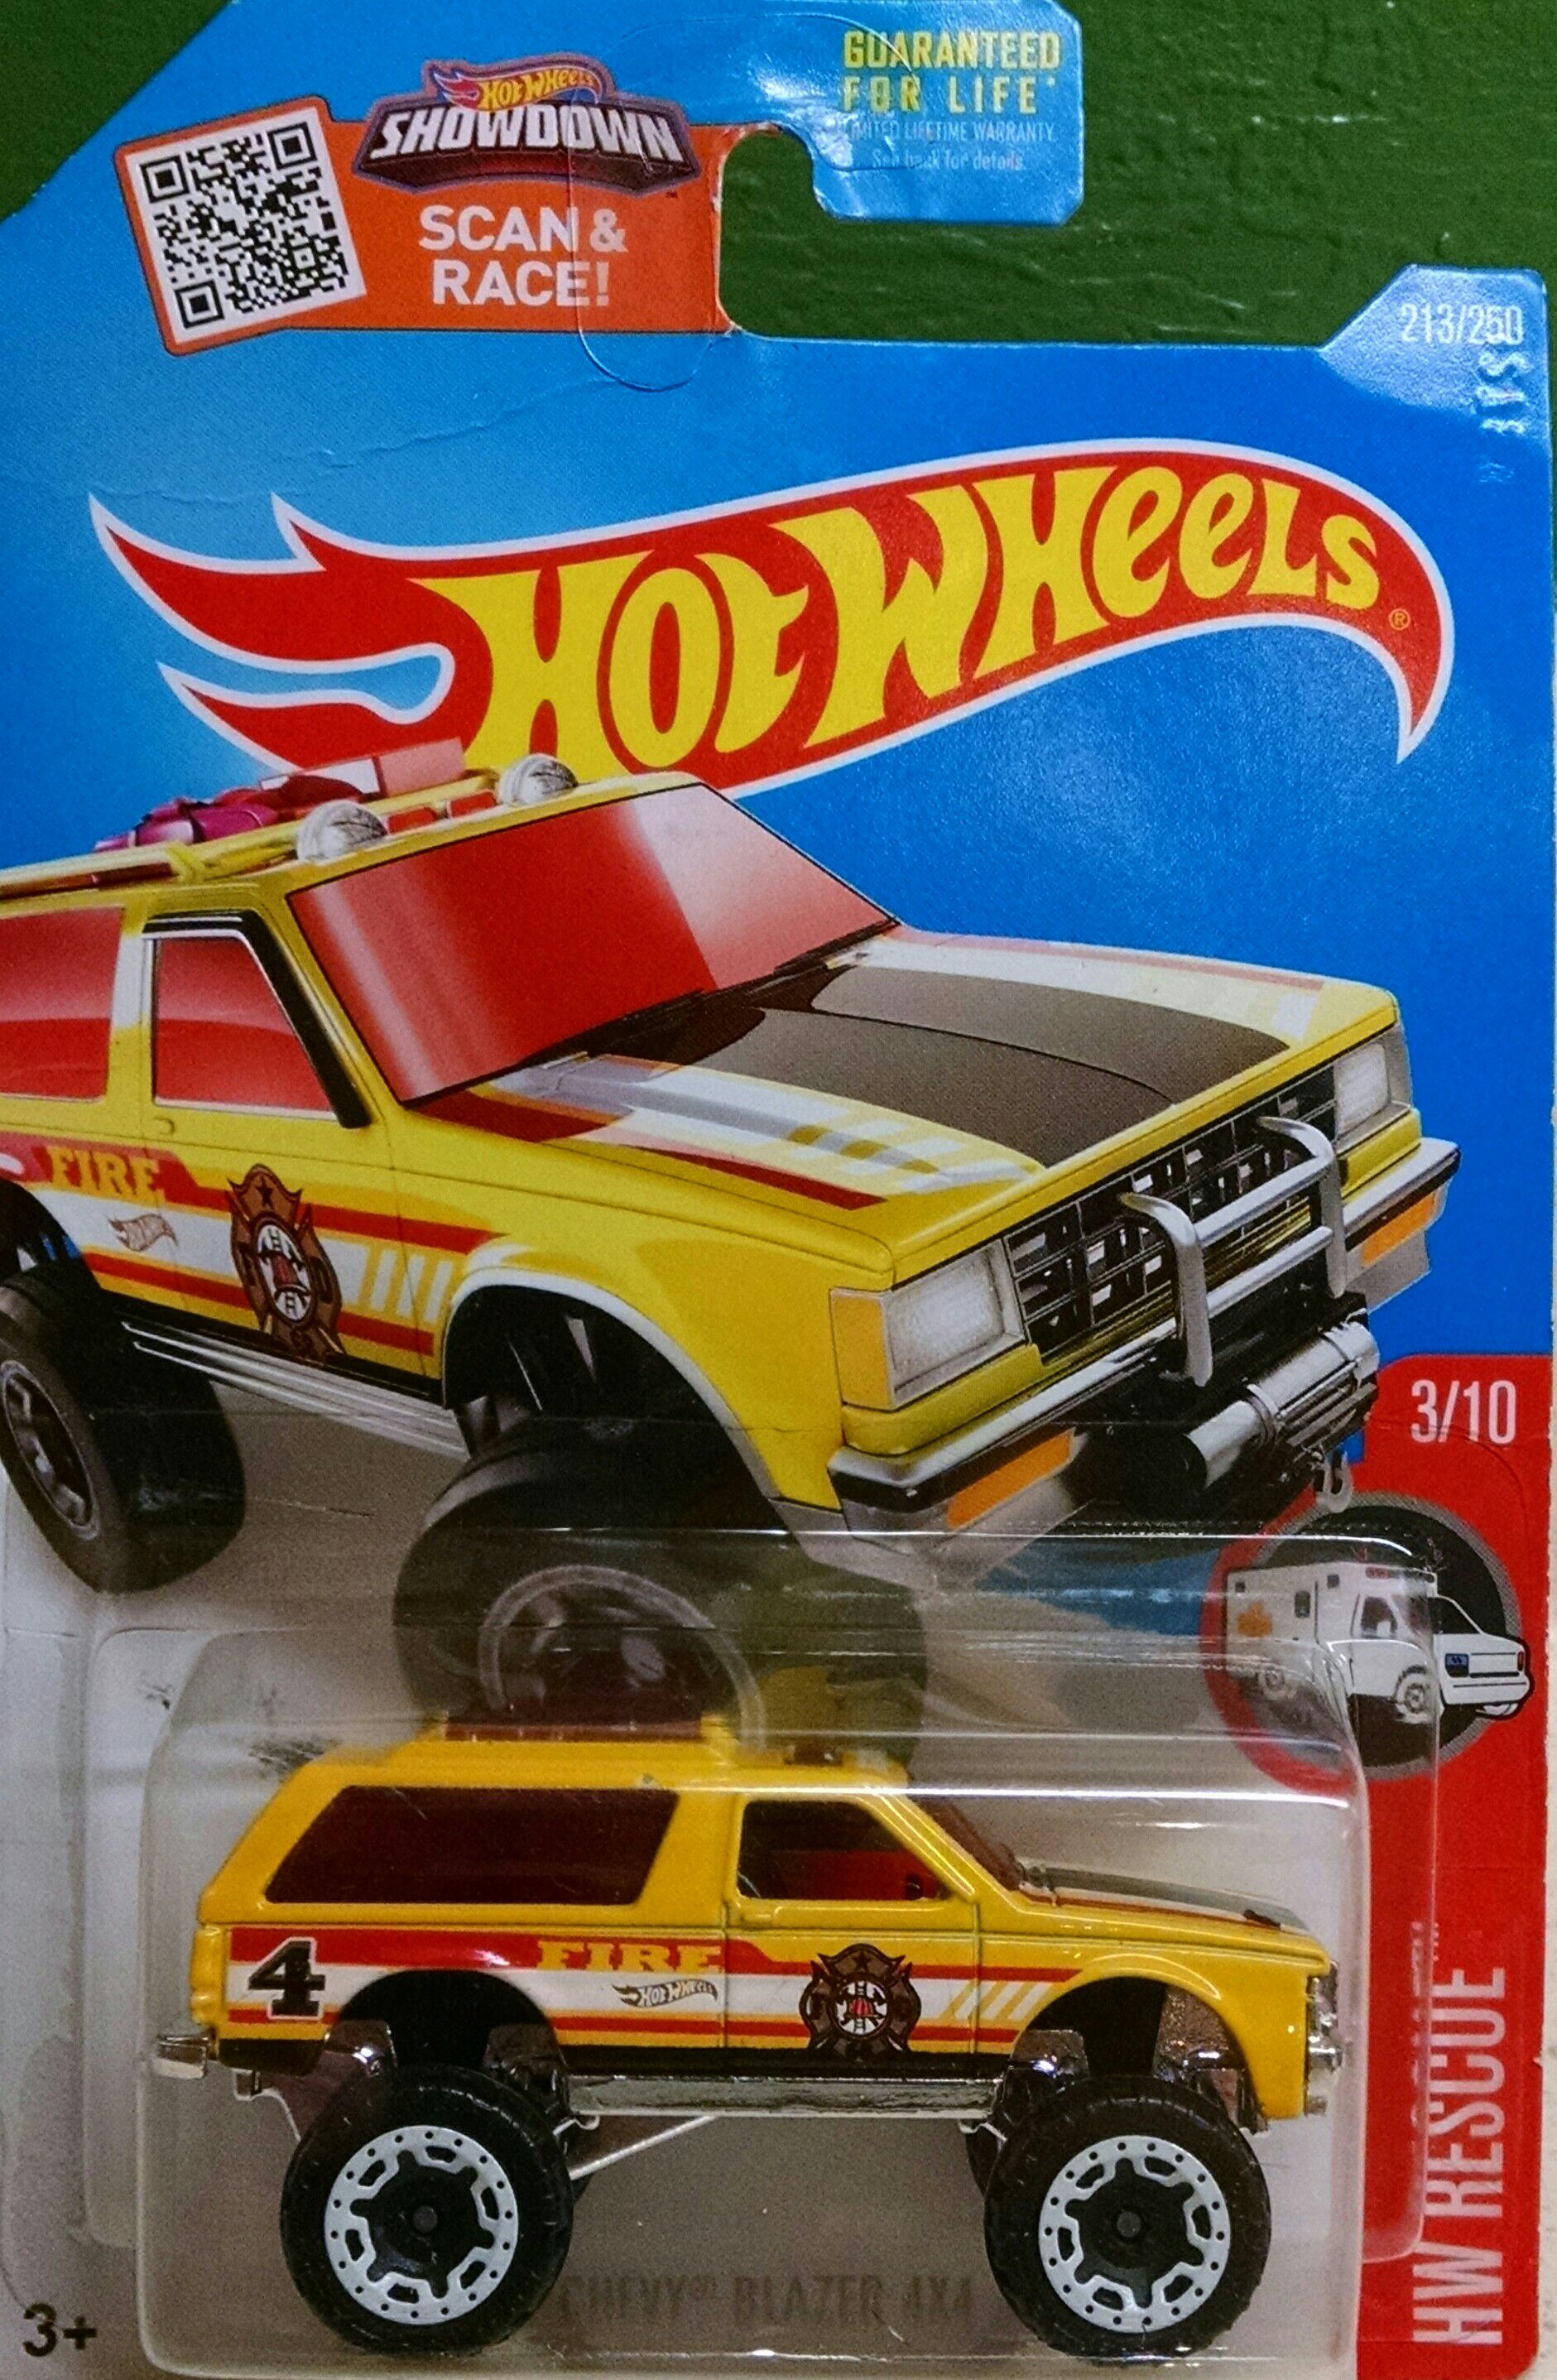 Chevy Blazer 4x4 - HW Rescue toy car collectible - Main Image 1